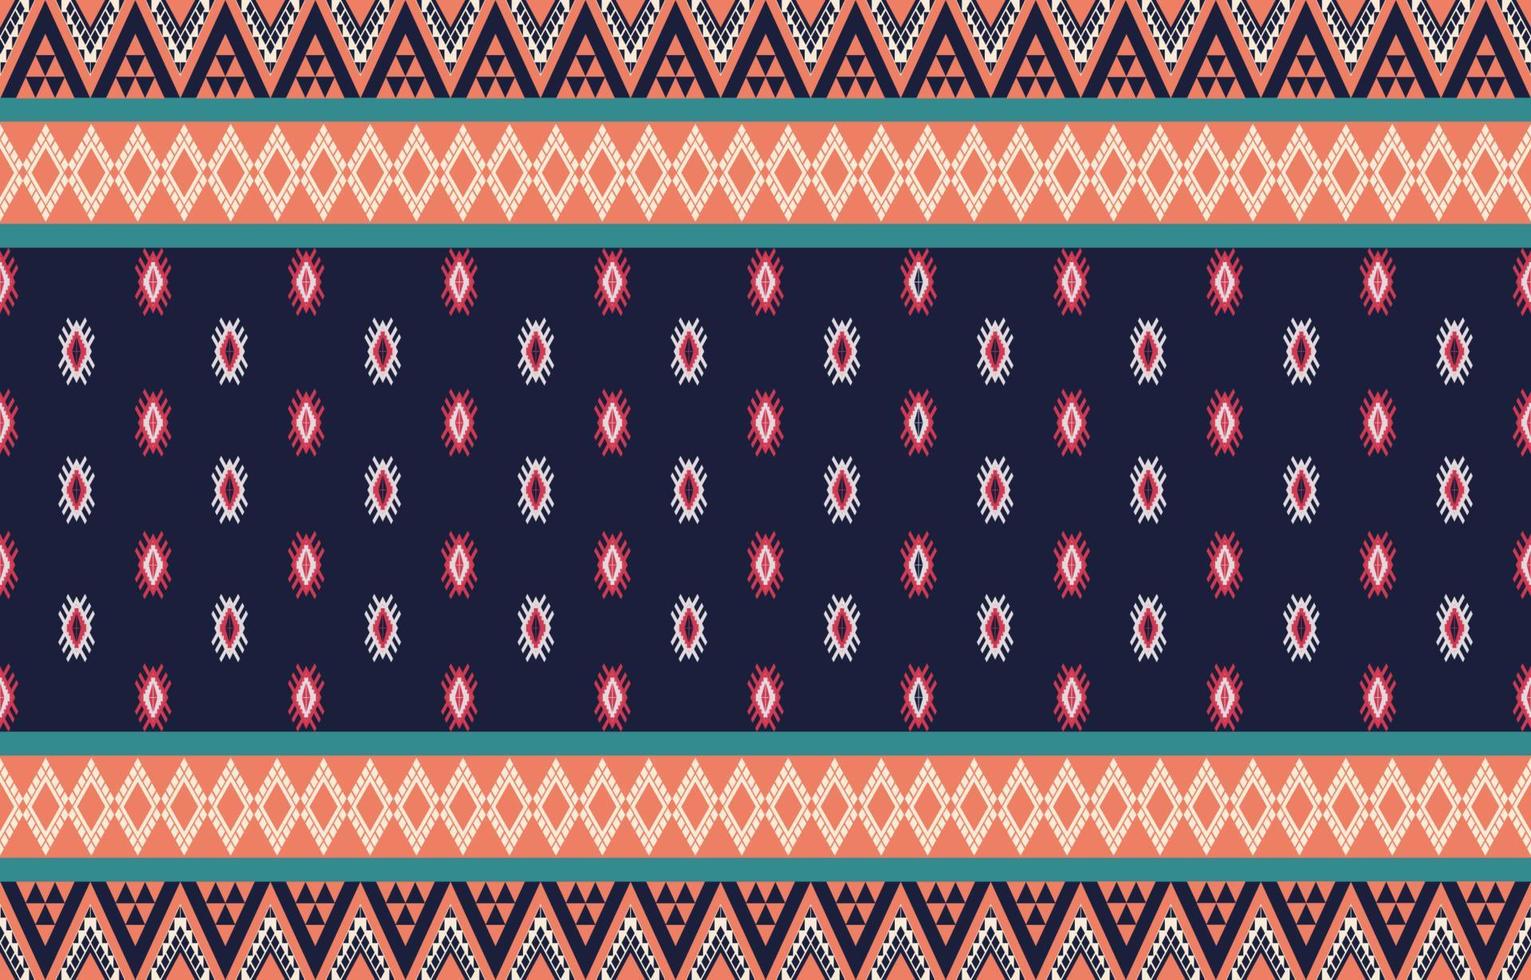 triangle geometric pattern colorful,Tribal ethnic texture style,design for printing on products, background,scarf,clothing,wrapping,fabric,vector illustration. vector